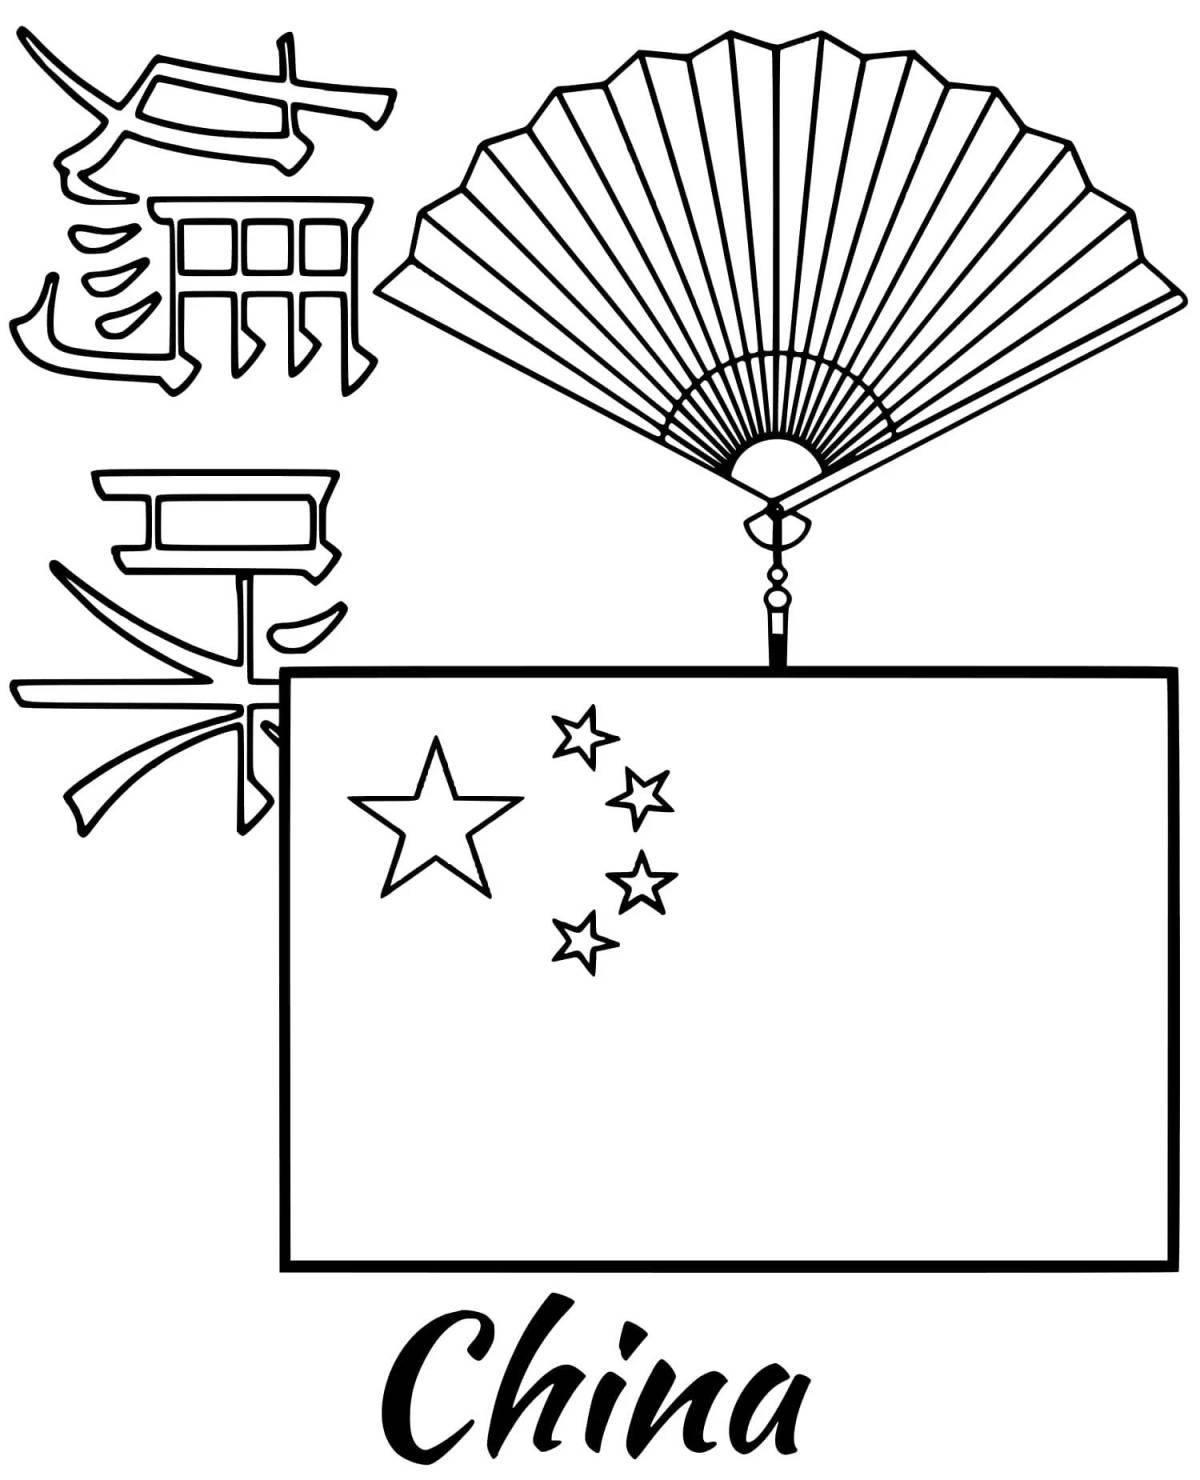 Rampant Chinese flag coloring page